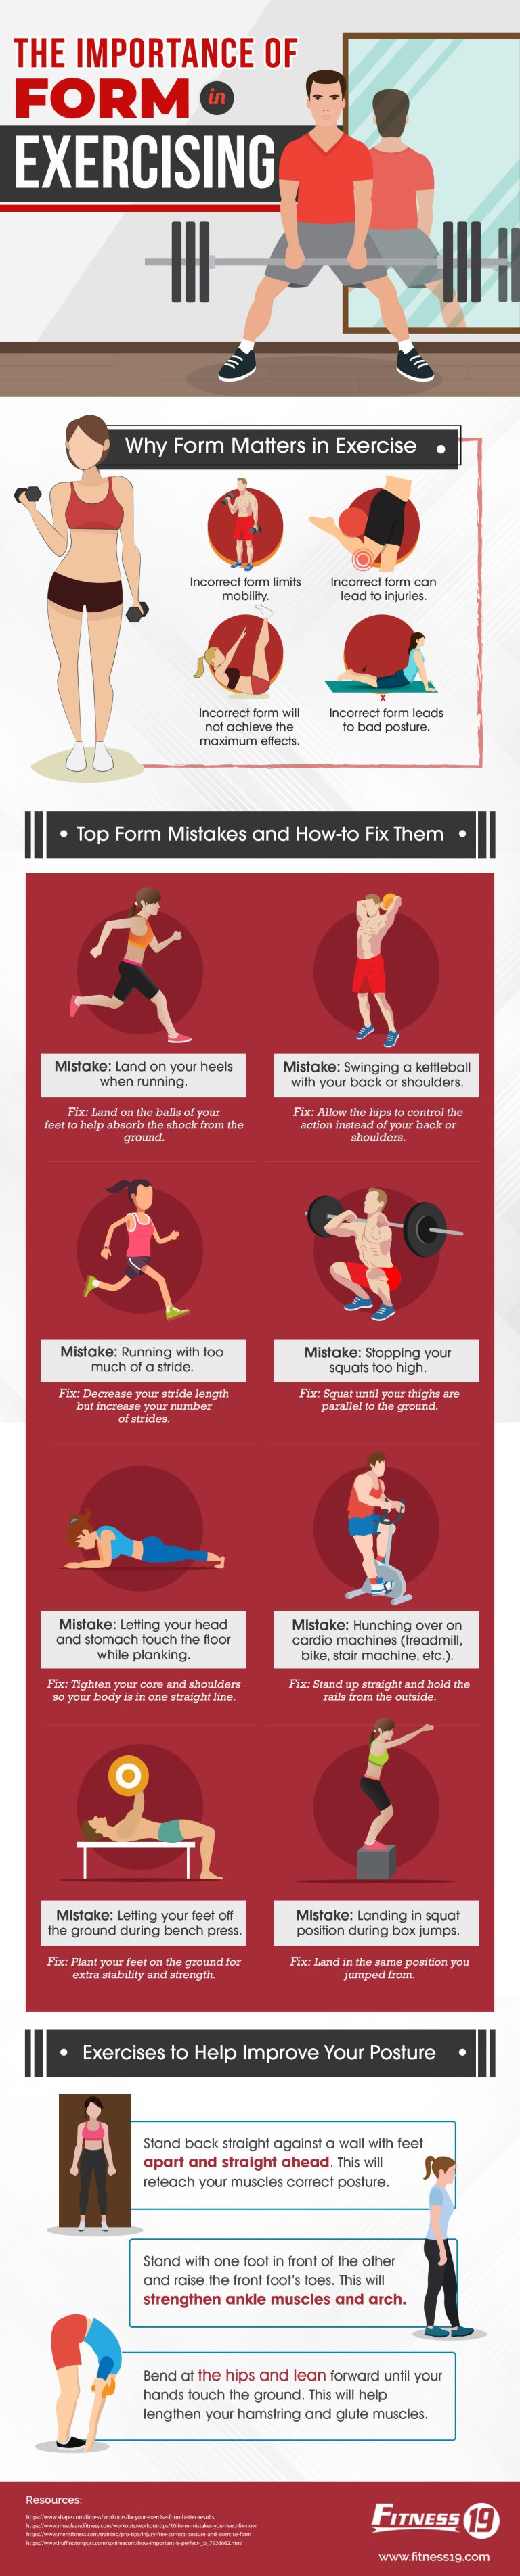 The-Importance-of-Form-in-Exercising